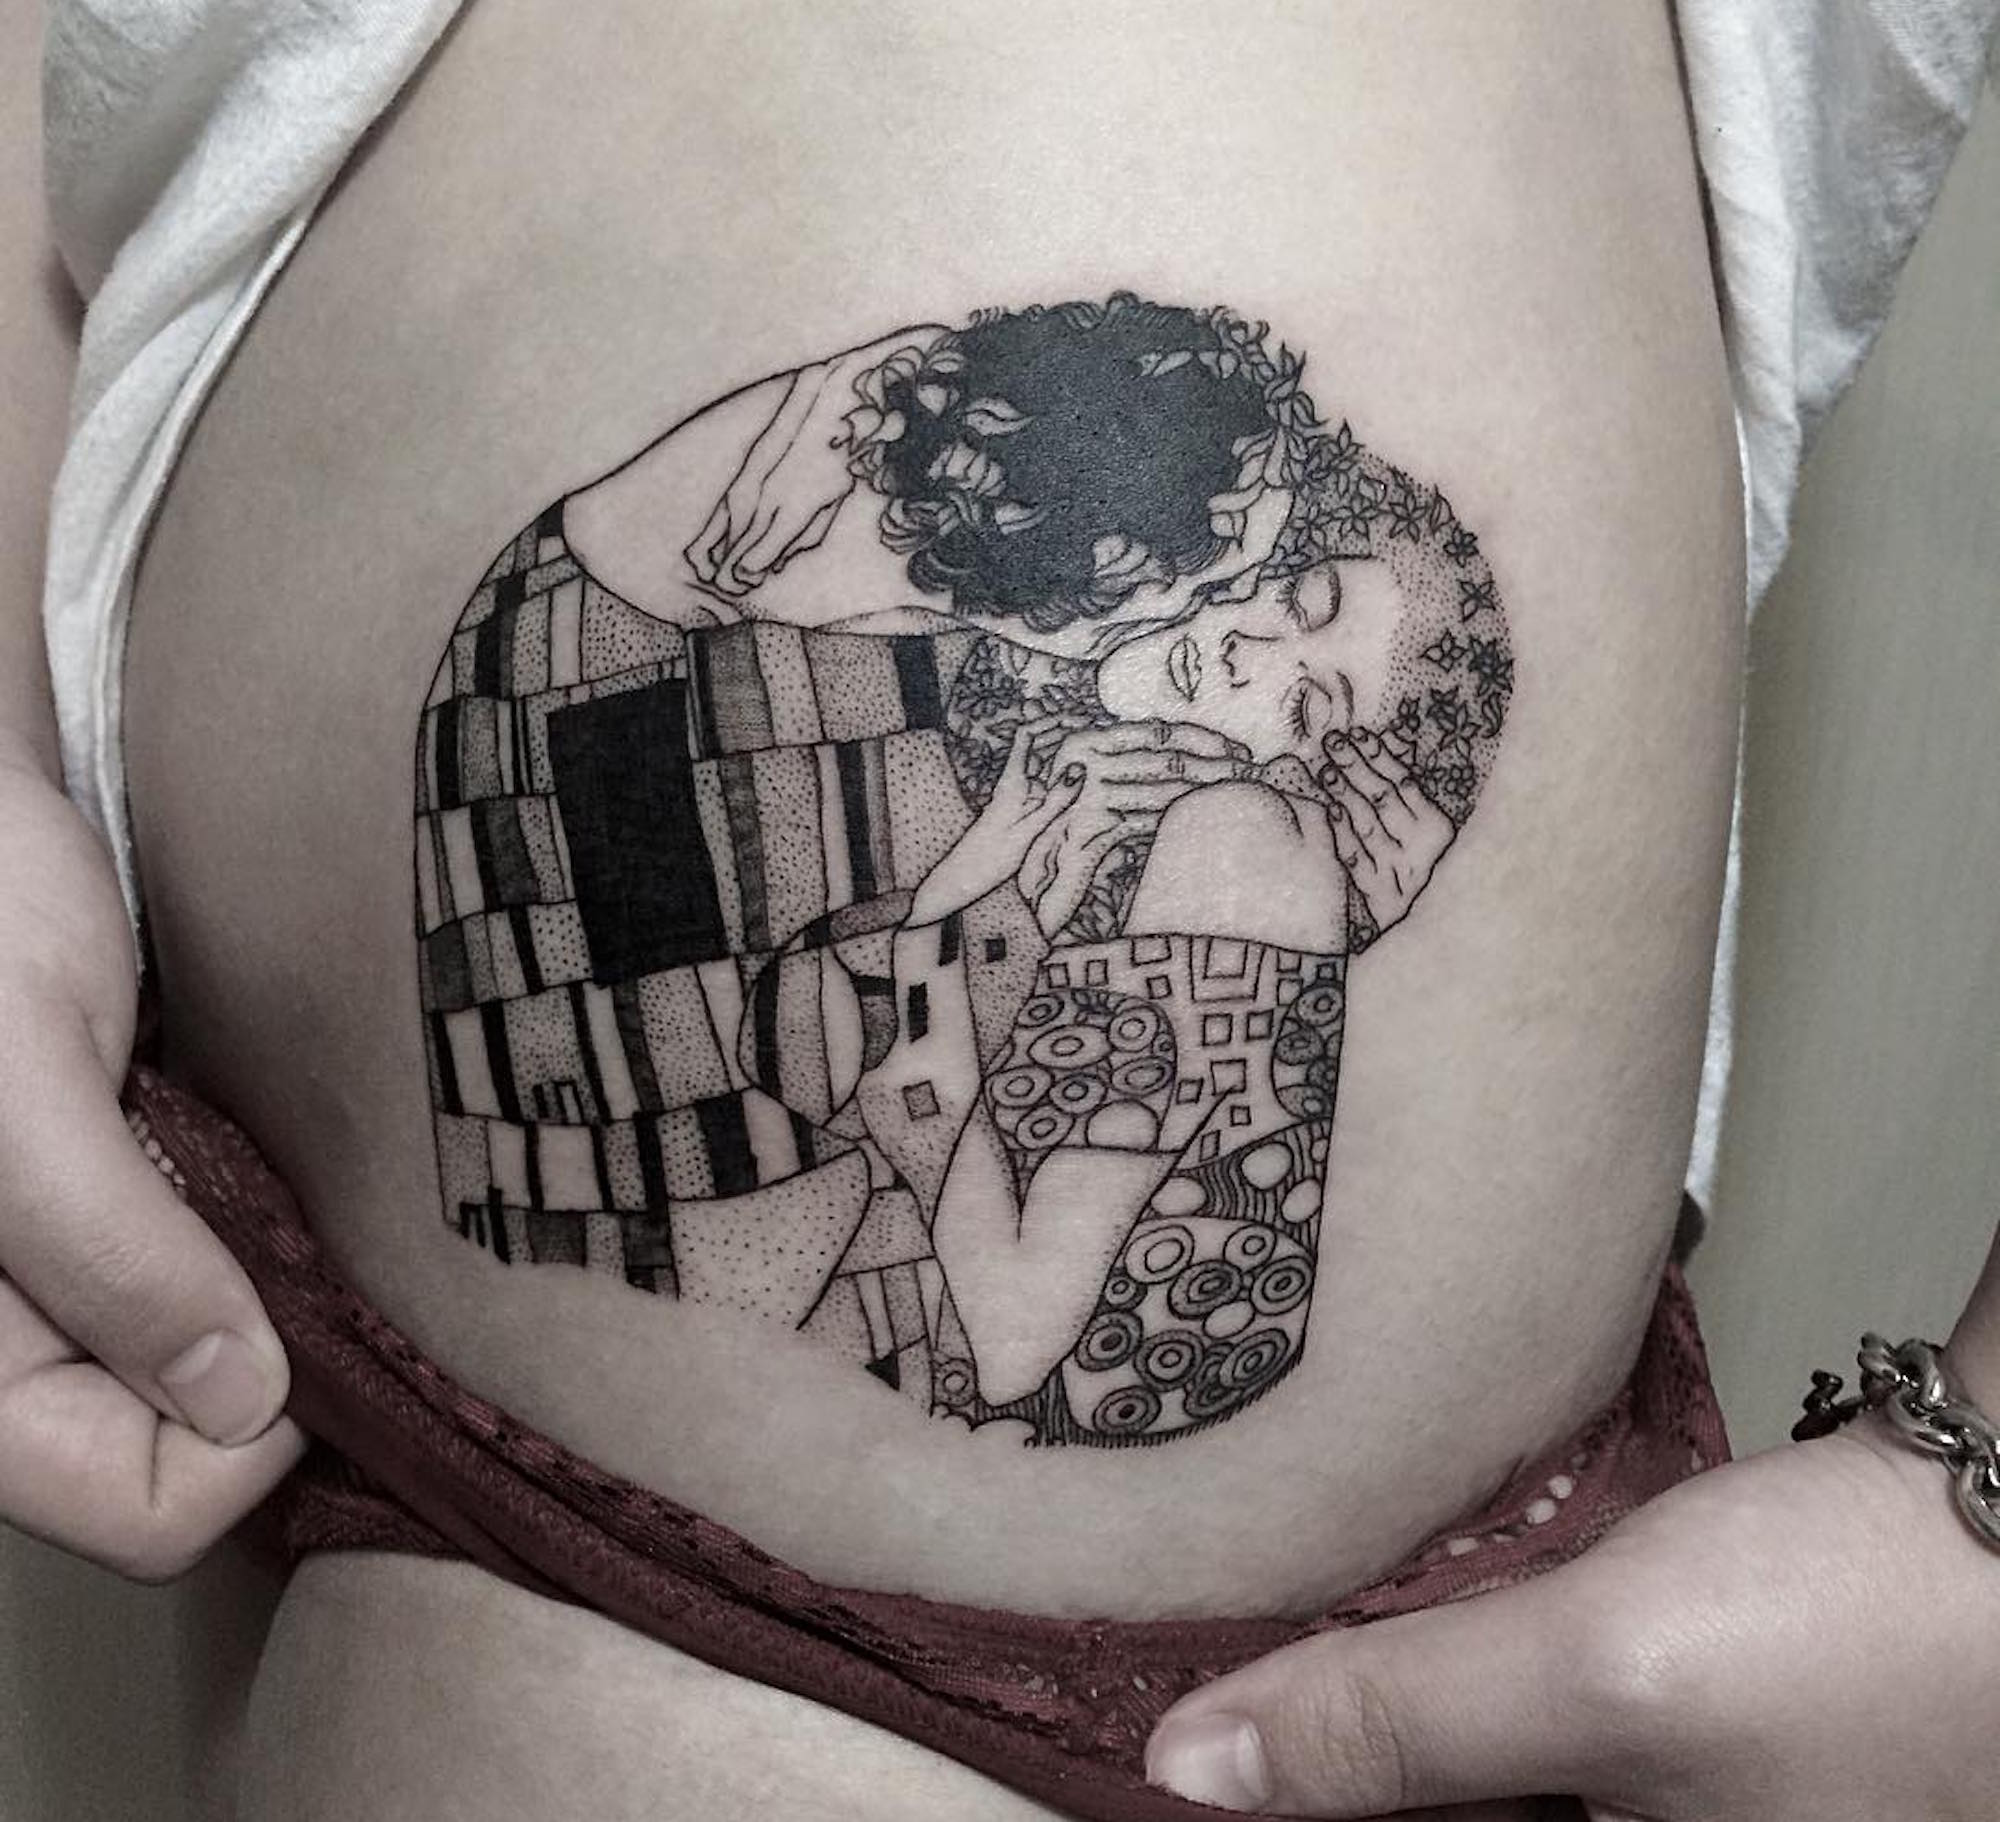 Masterfully Drafted Tattoos By OOZY Add Twist To Famous Art Scene360